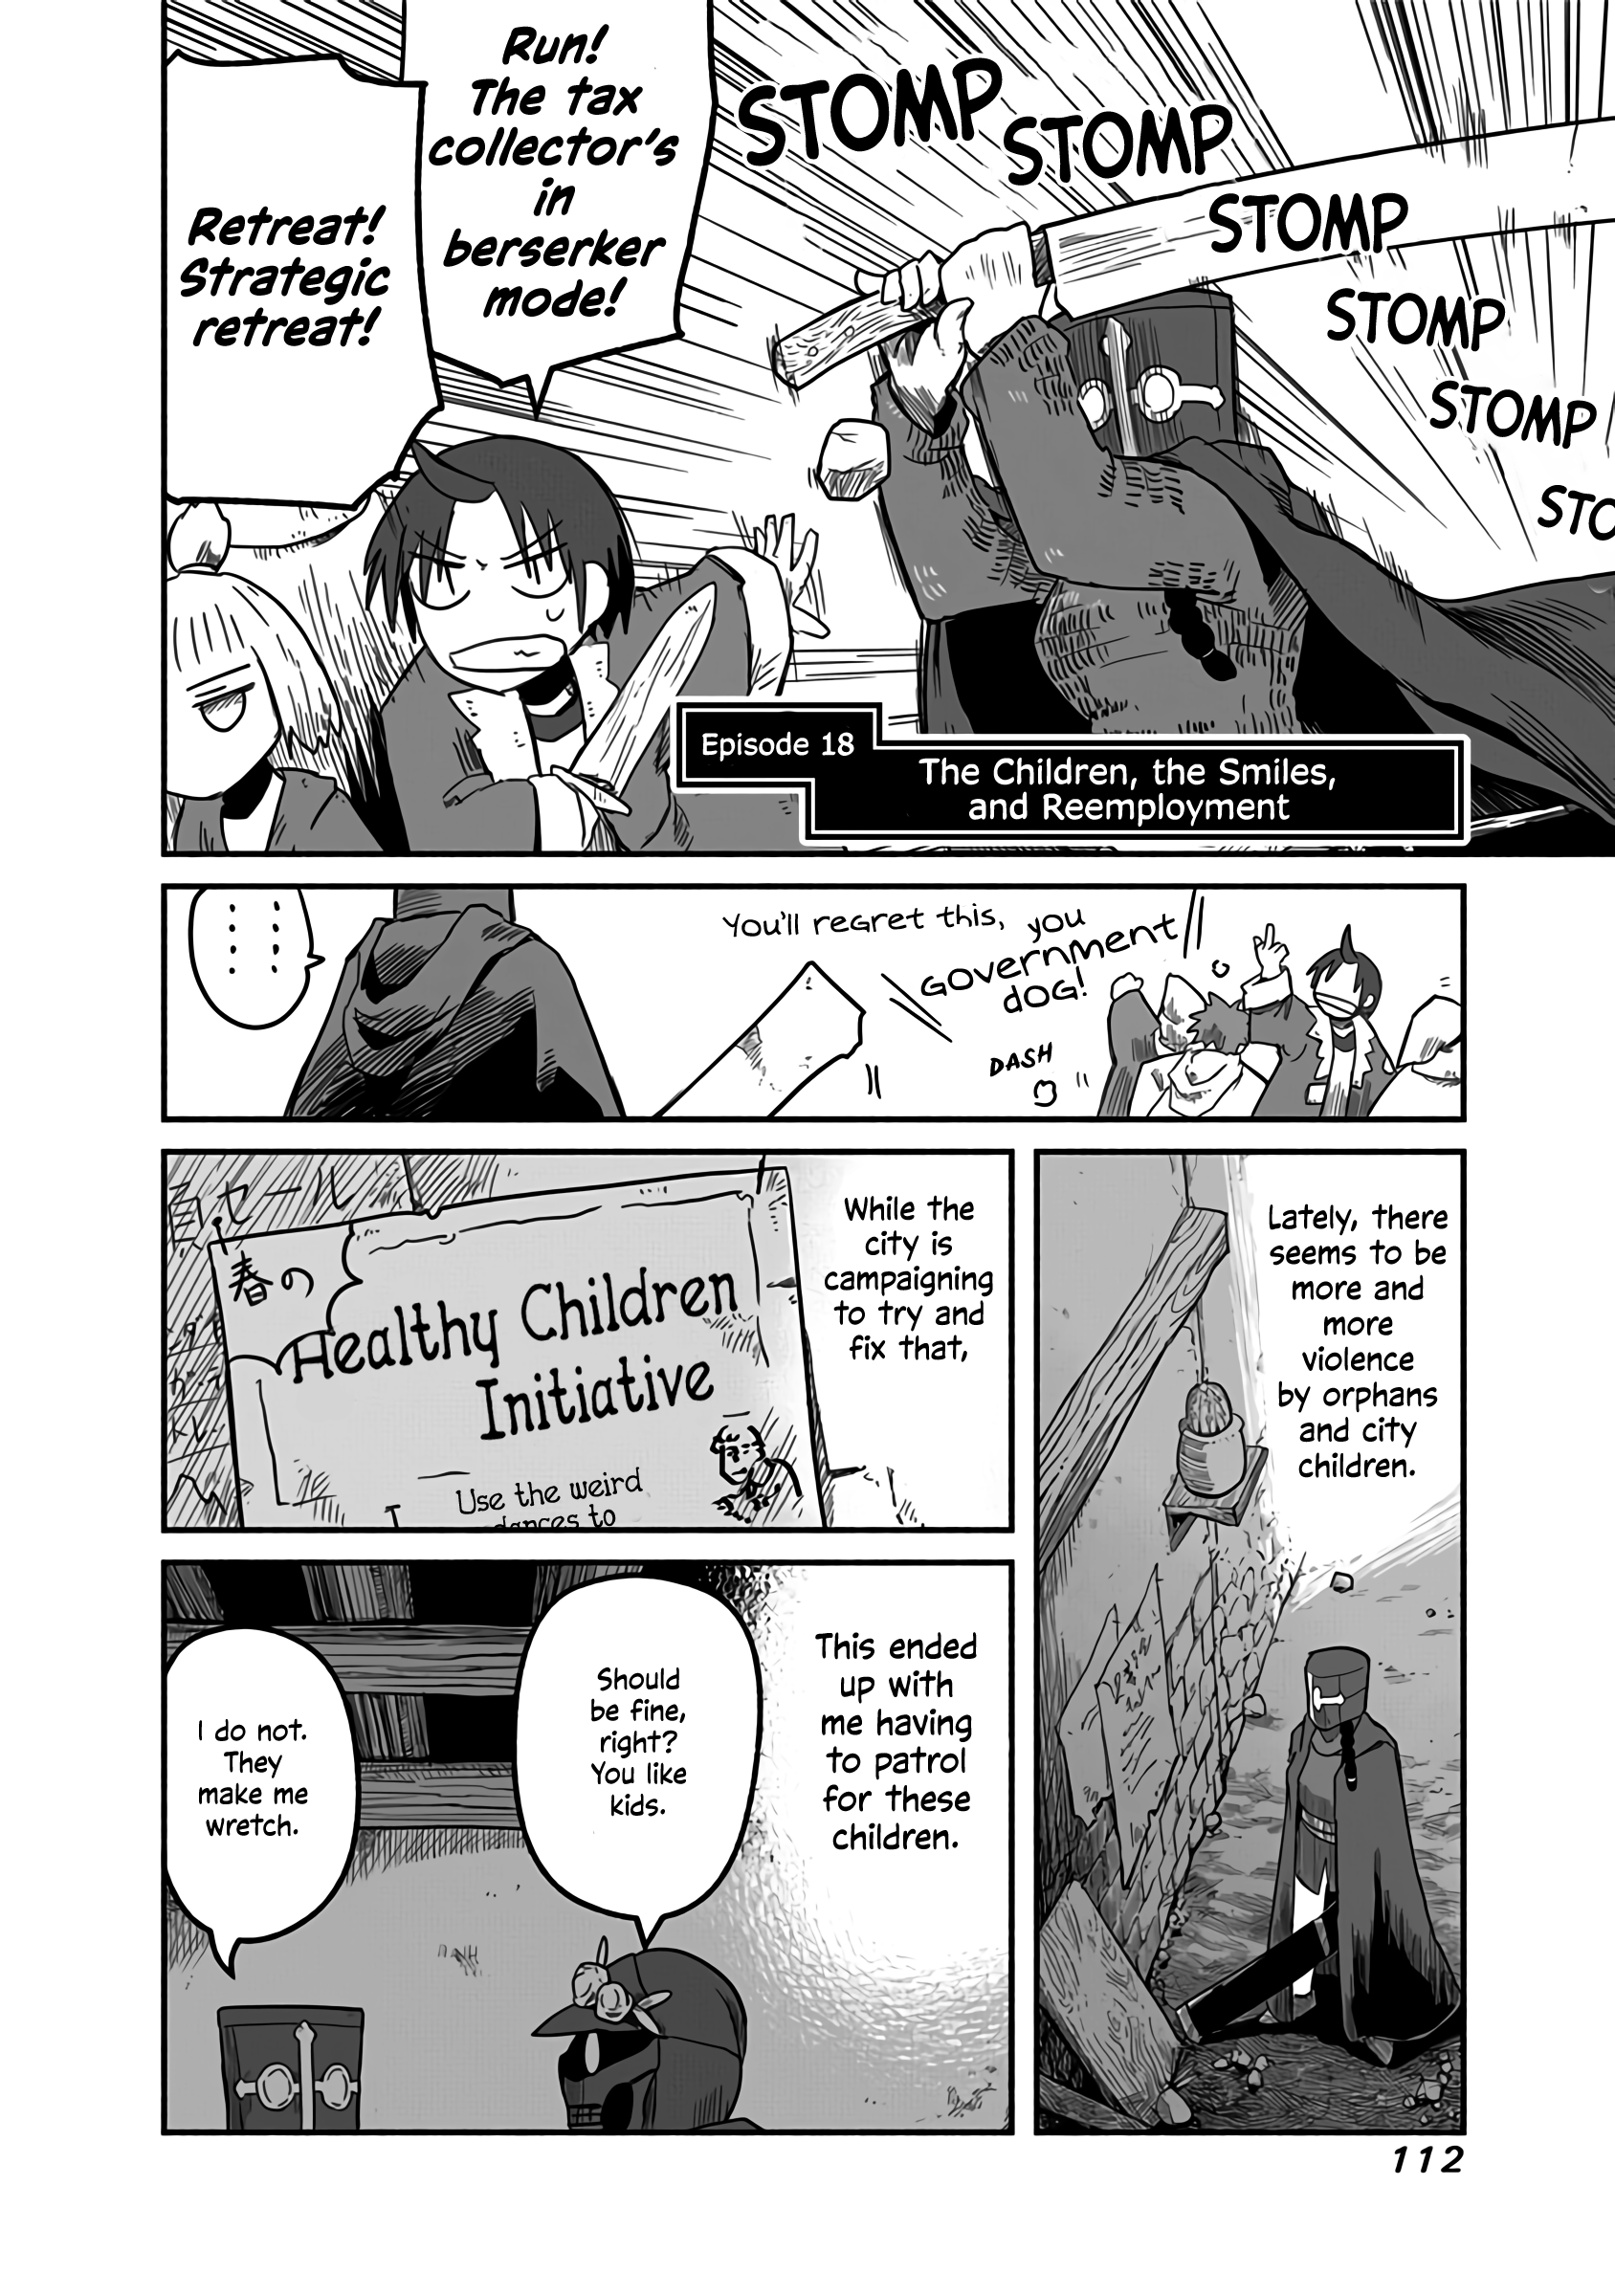 The Dragon, The Hero, And The Courier Vol.3 Chapter 18: The Children, The Smiles, And Reemployment - Picture 3